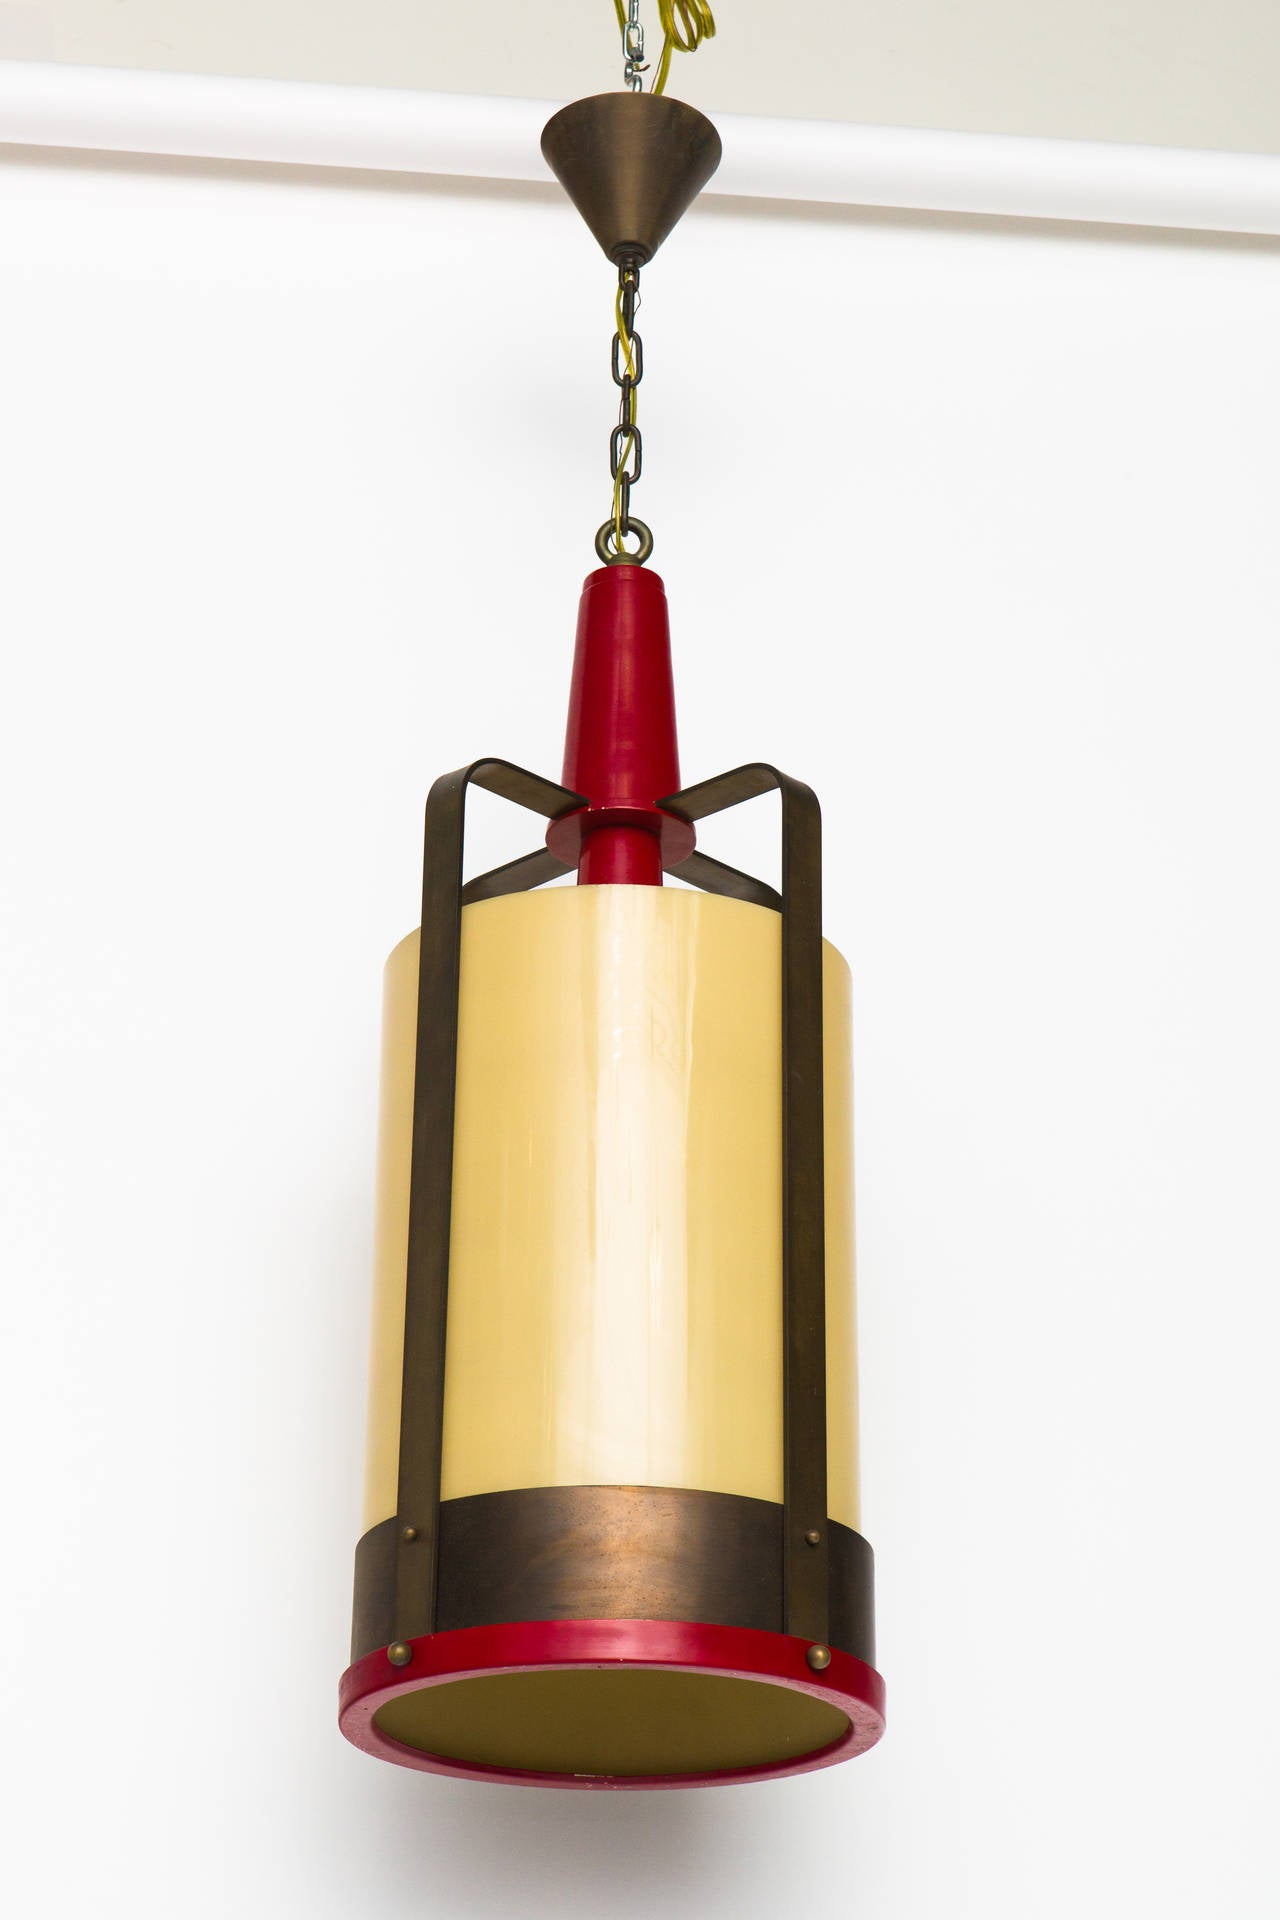 Large pendant lamp with amber glass diffuser, American, 1958.
Rewired with one porcelain socket. Max. 200 Watts.